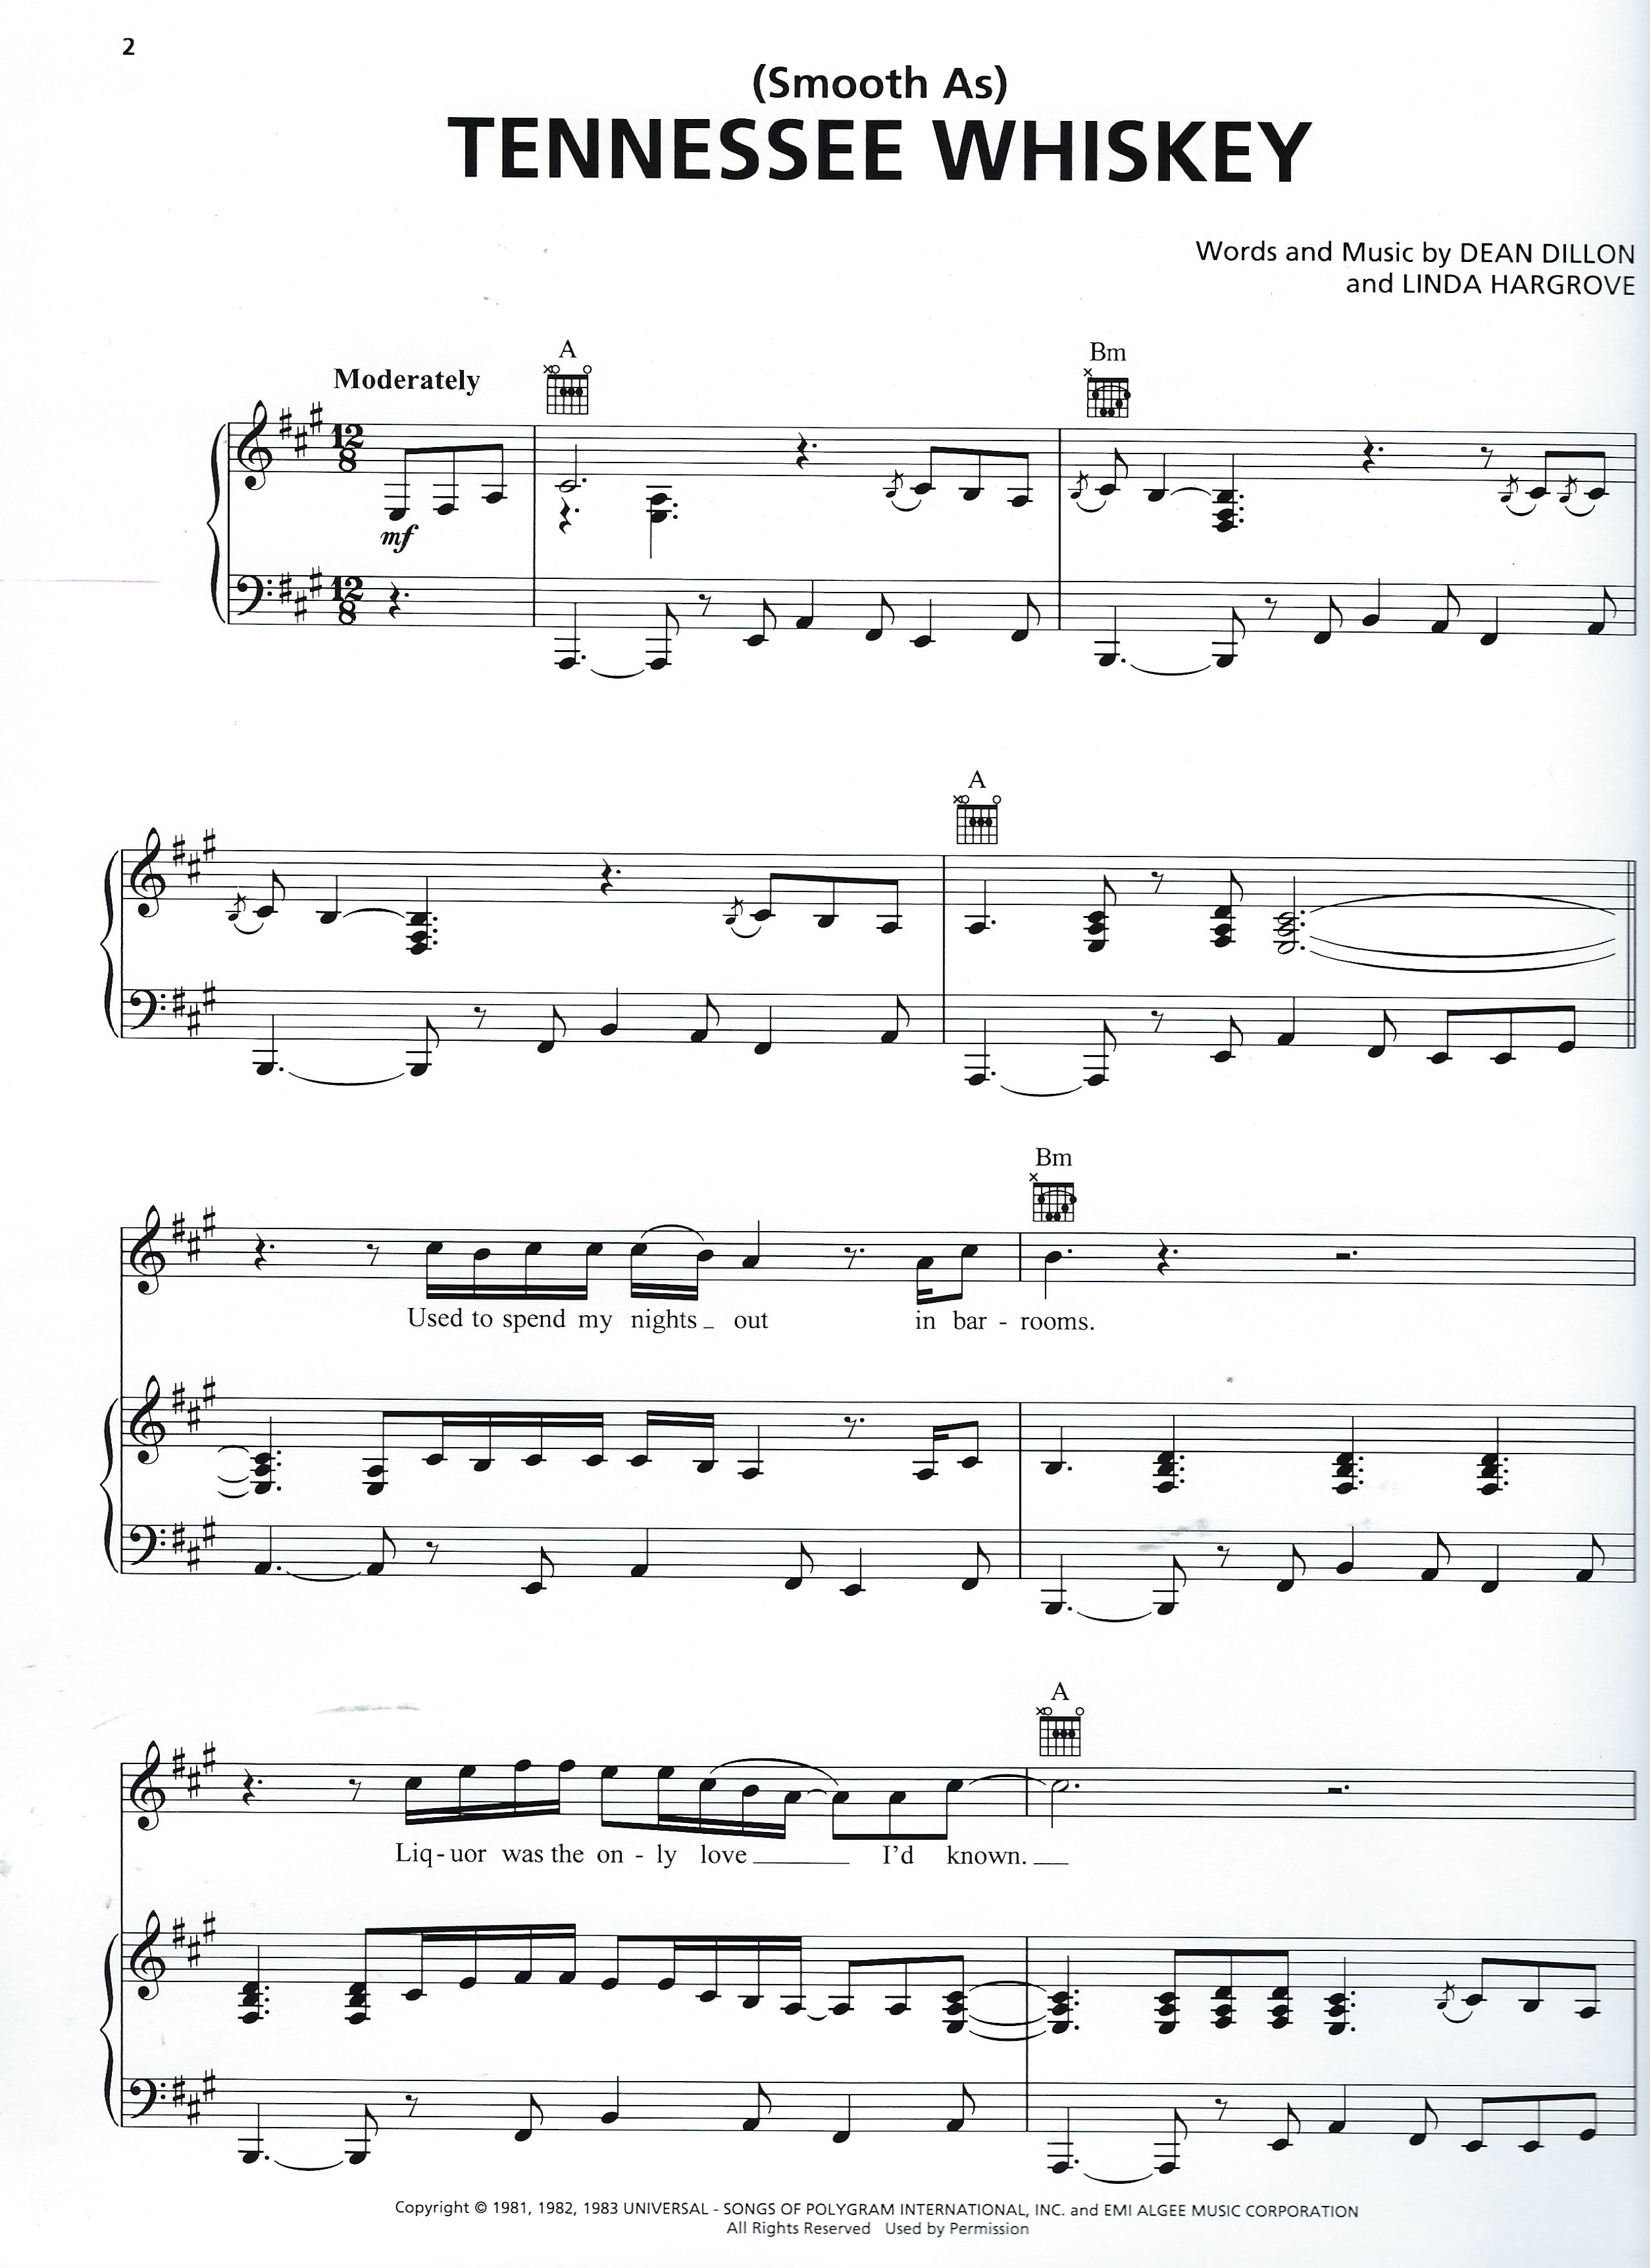 Tennessee Whiskey Sheet Music